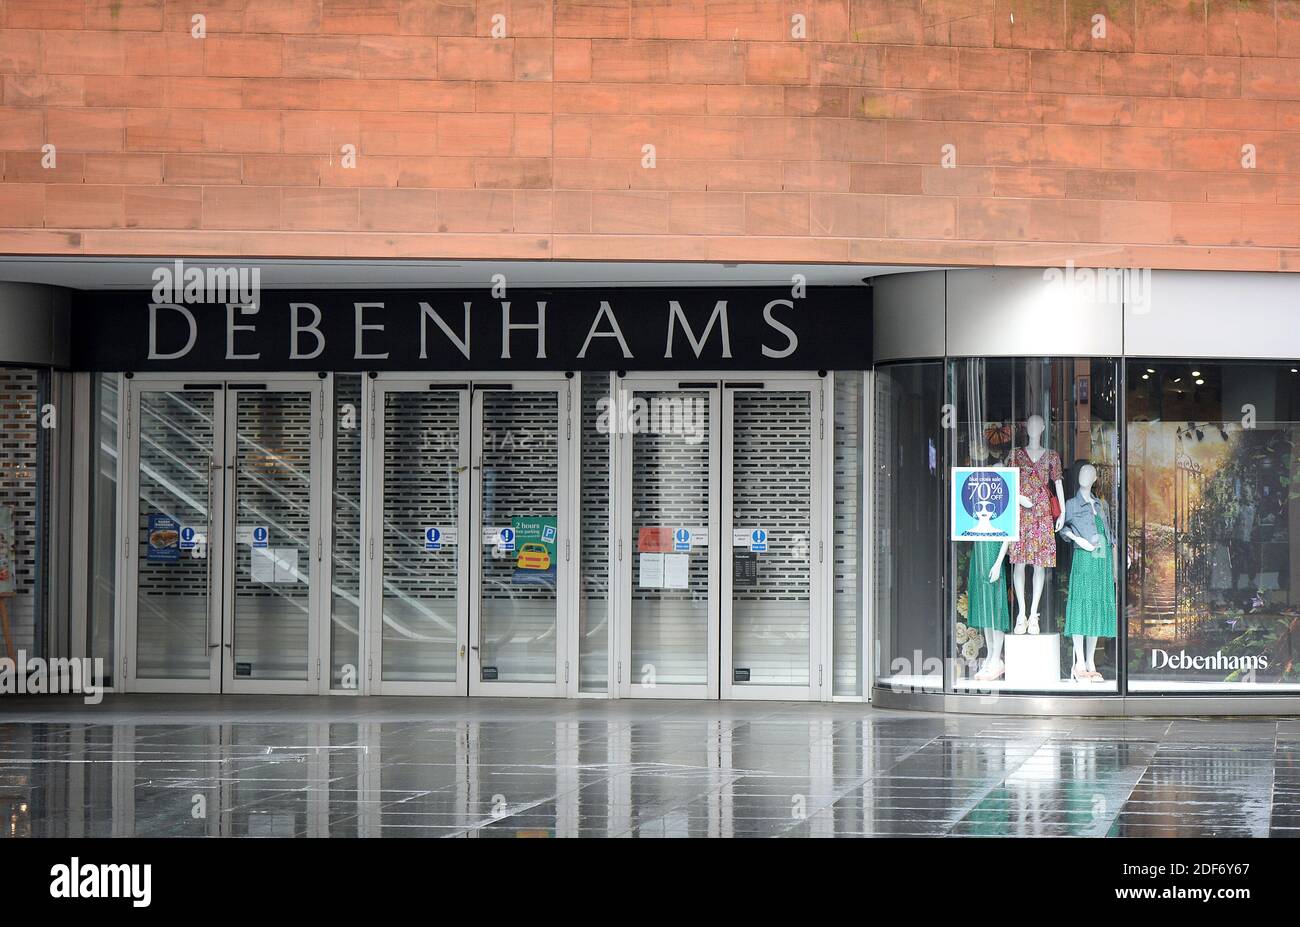 General view of the closed Debenhams store in Liverpool city centre, which is set to file for administration, after the Covid-19 Coronavirus lockdown forced it to shut its shops across the UK.  Debenhams announced today, on April 6, 2020 that it was having to file for administration as a consequence of having to shut all its stores across the UK under the covid-19 coronavirus lockdown. This is to be the second time in a year that the struggling retailer has filed for administration. Its present predicament comes not long after its permanent closure of 22 stores, resulting in more than 700 job Stock Photo